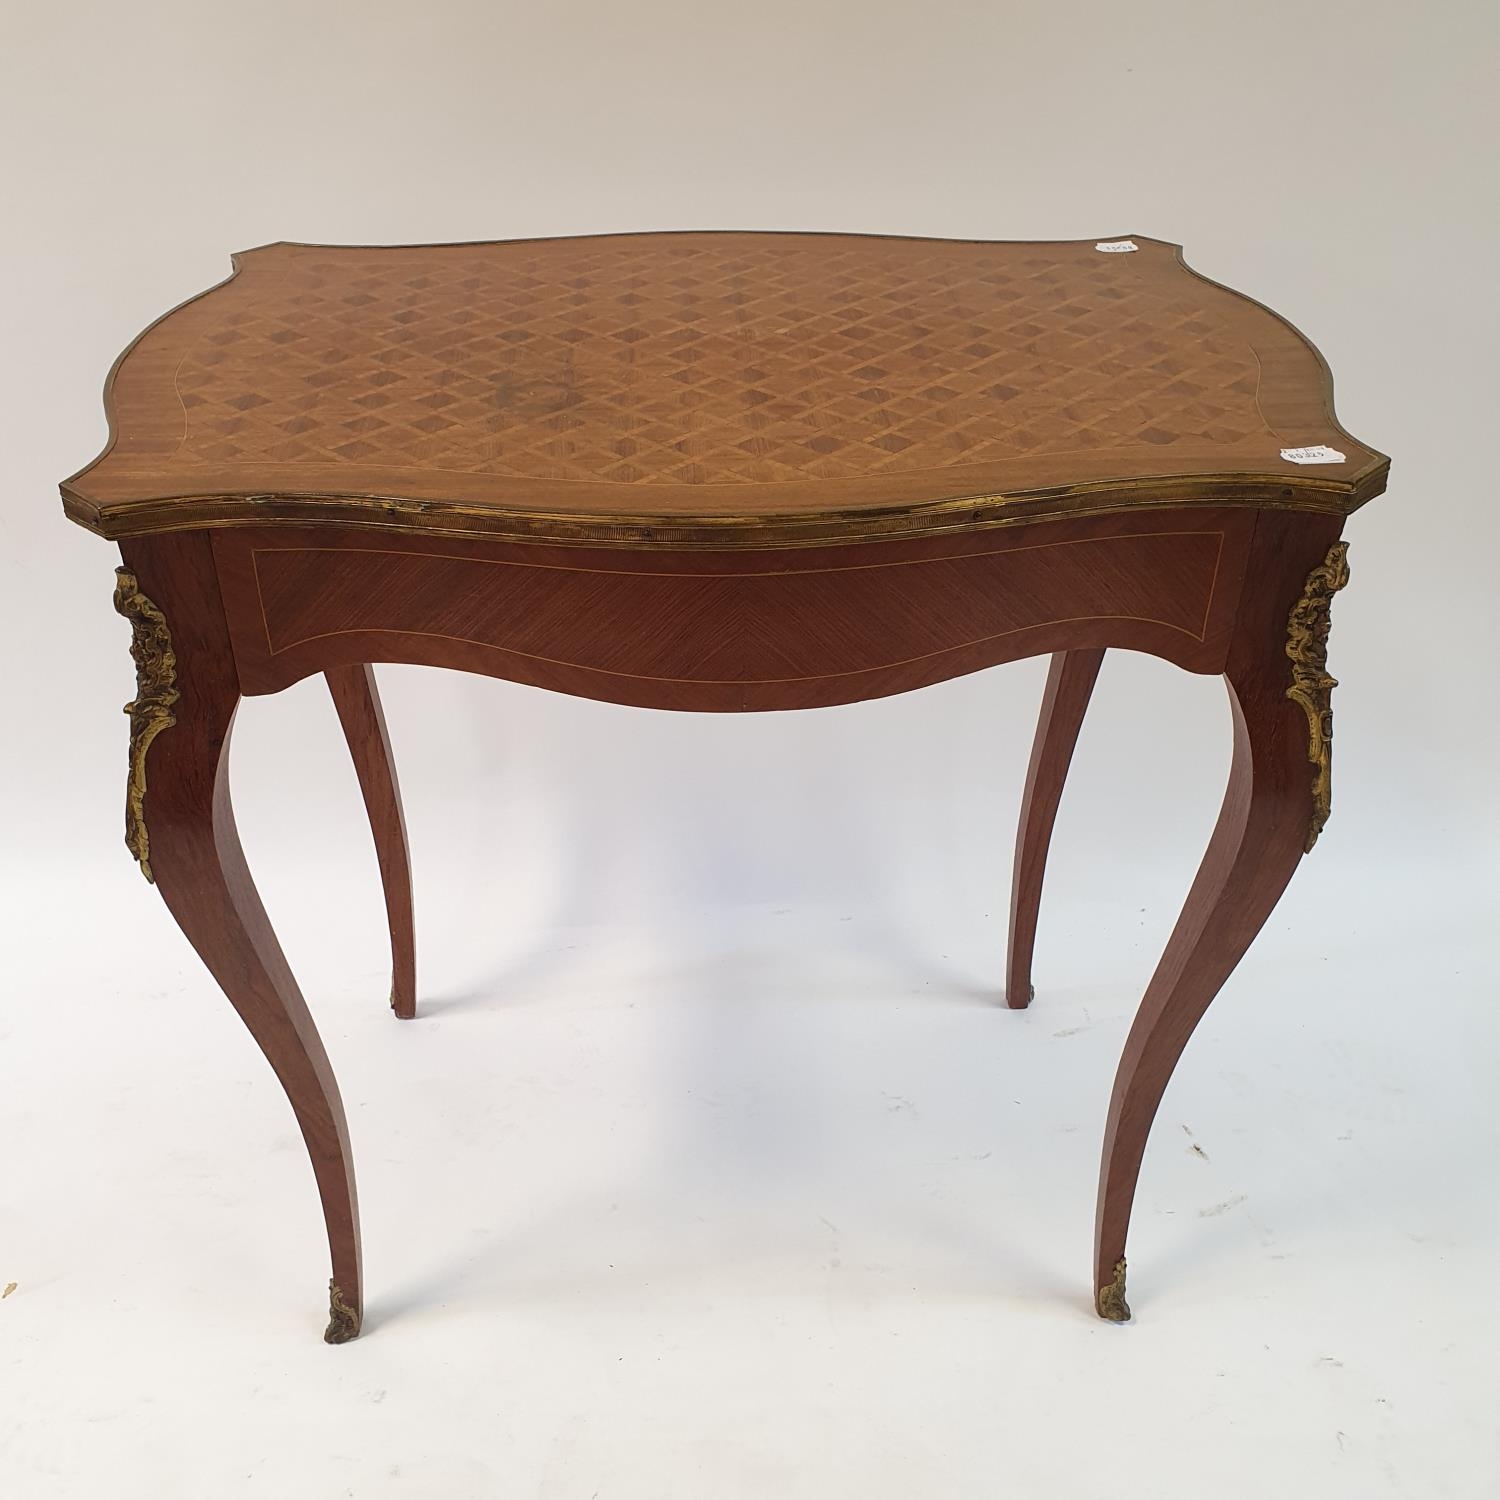 A 20th century French rosewood serpentine side table with parquetry inlay, having a single frieze